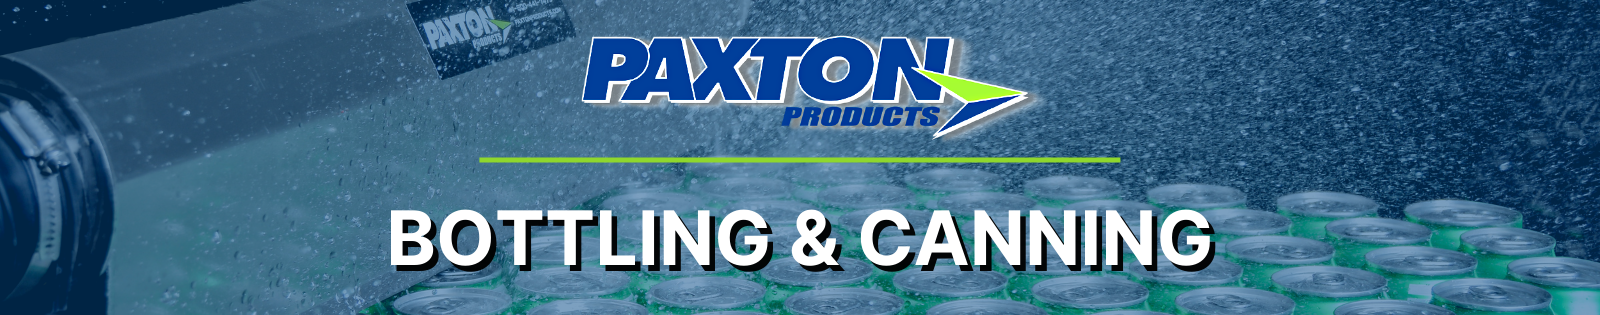 Paxton Products - Pharmaceutical, Medical, Nutraceutical Applications 